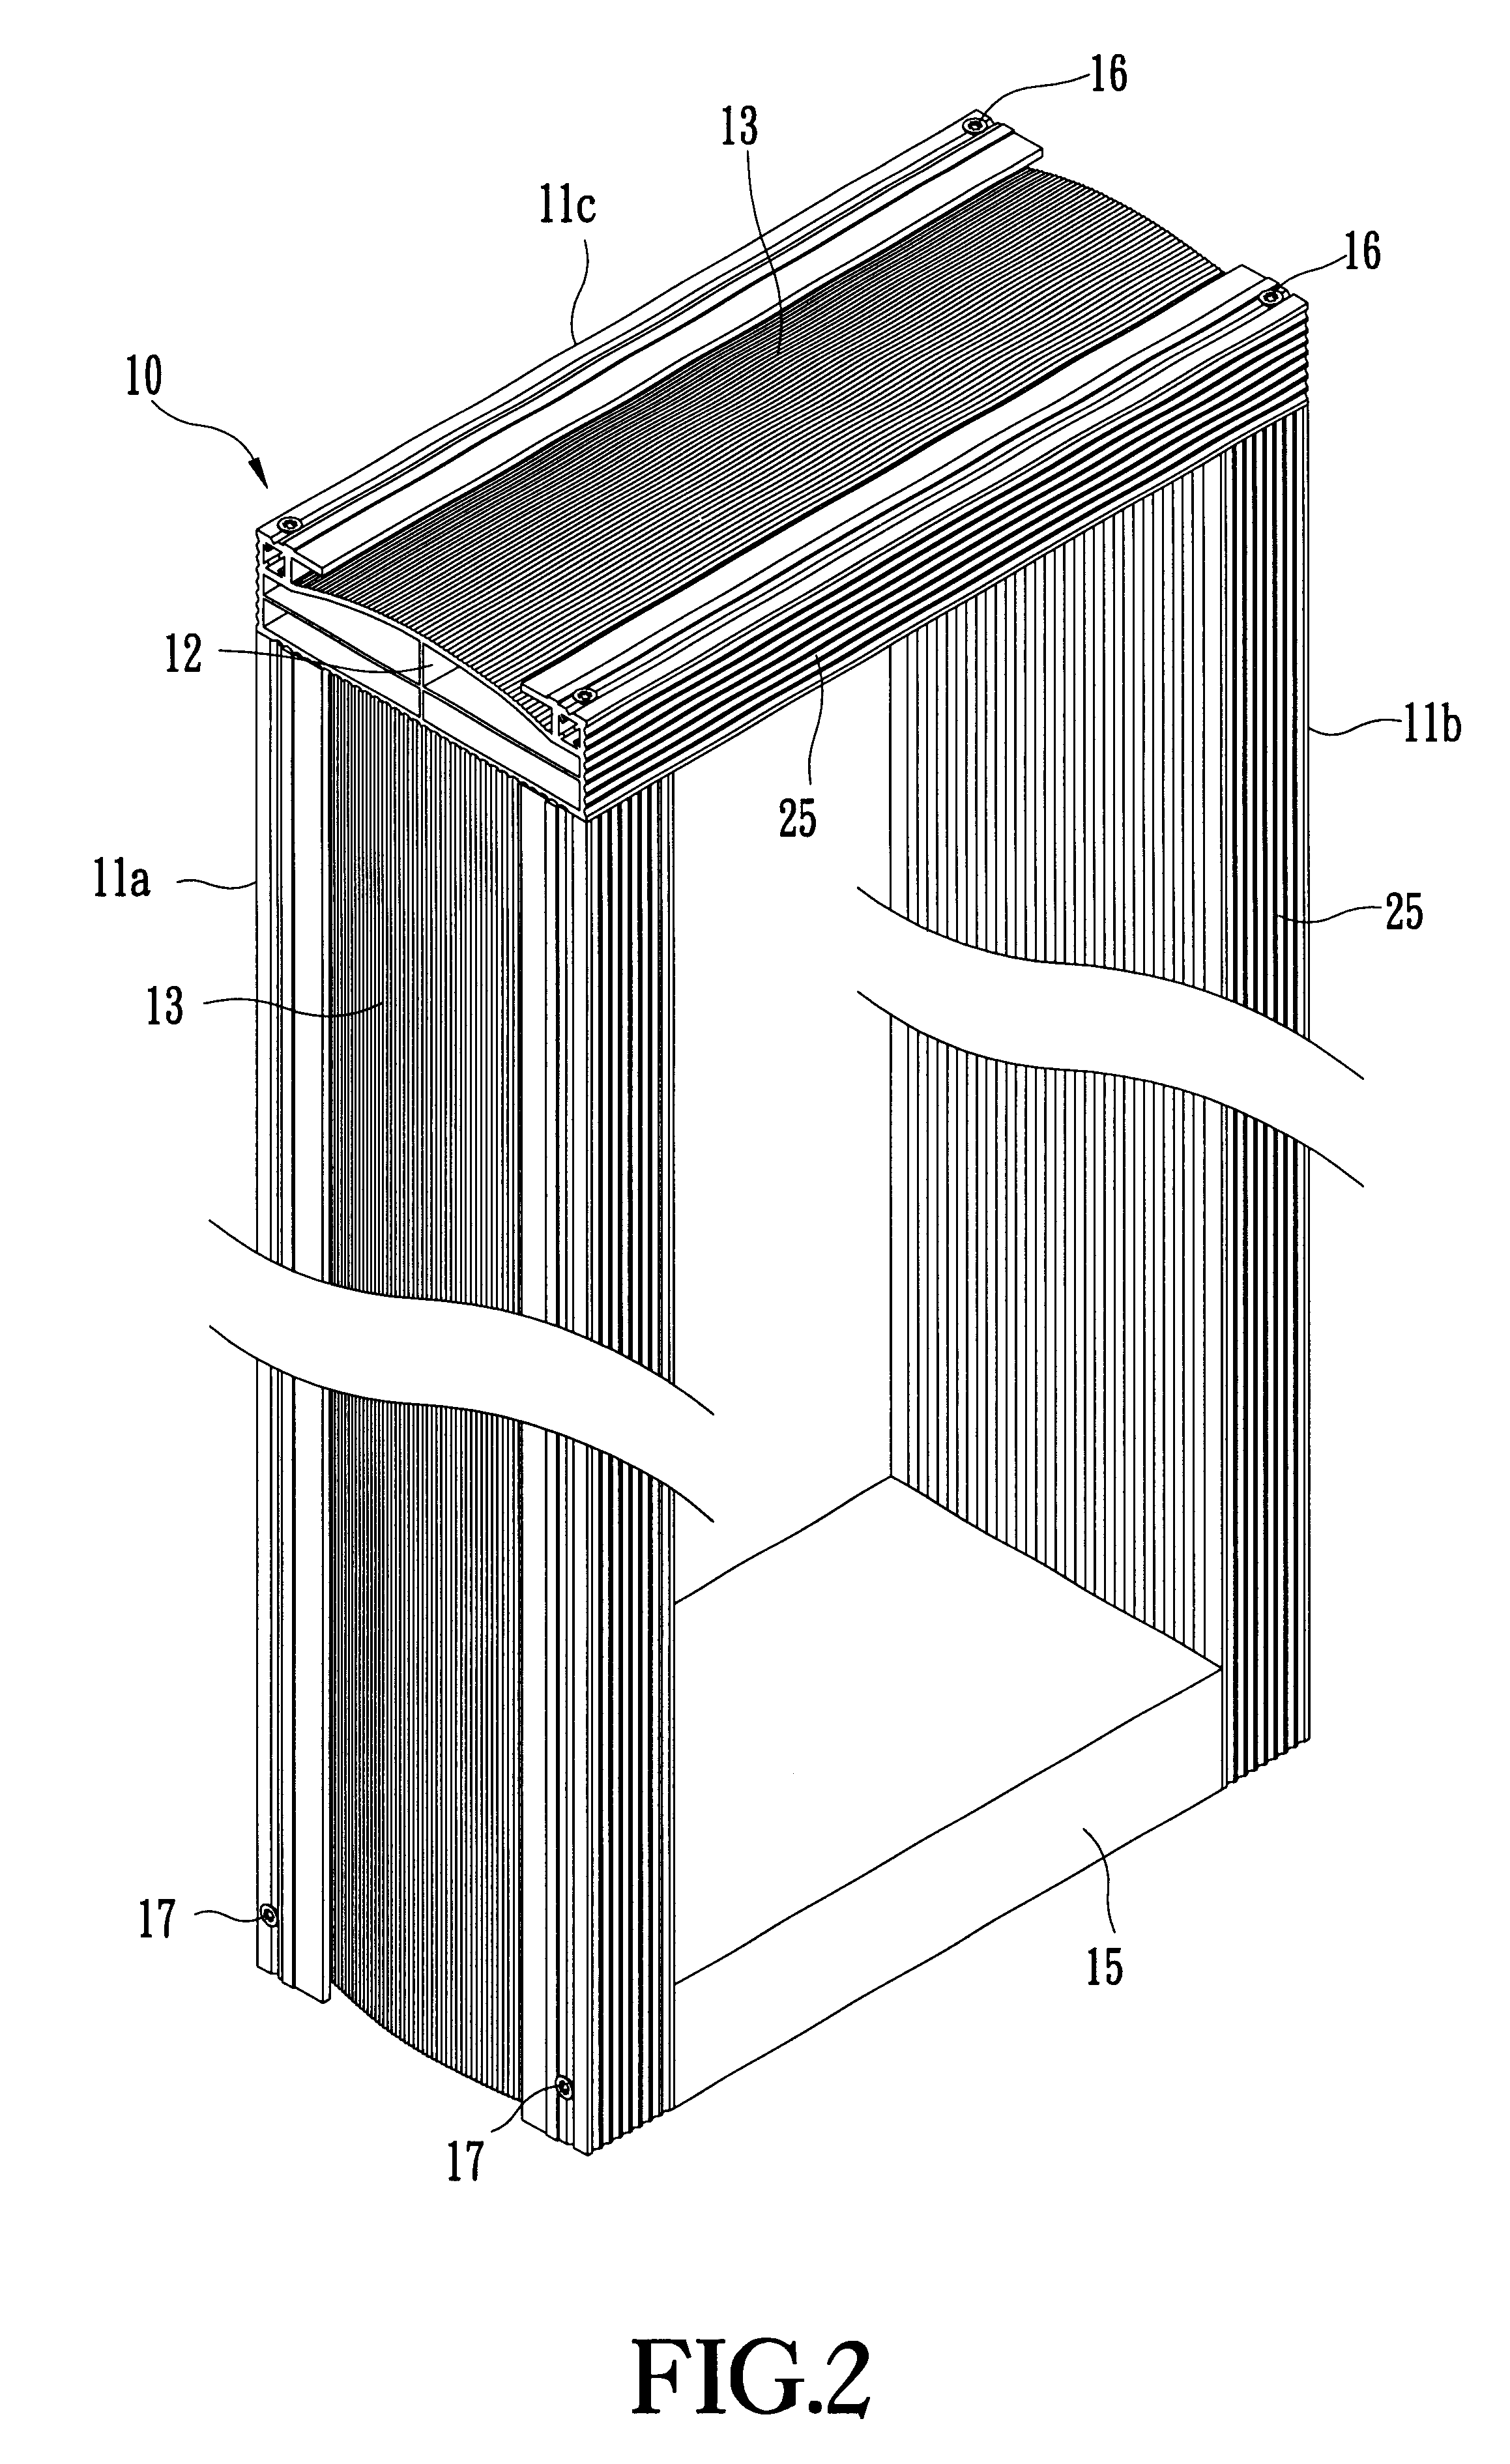 Auxiliary frame for improving conventional frame and method for working the same